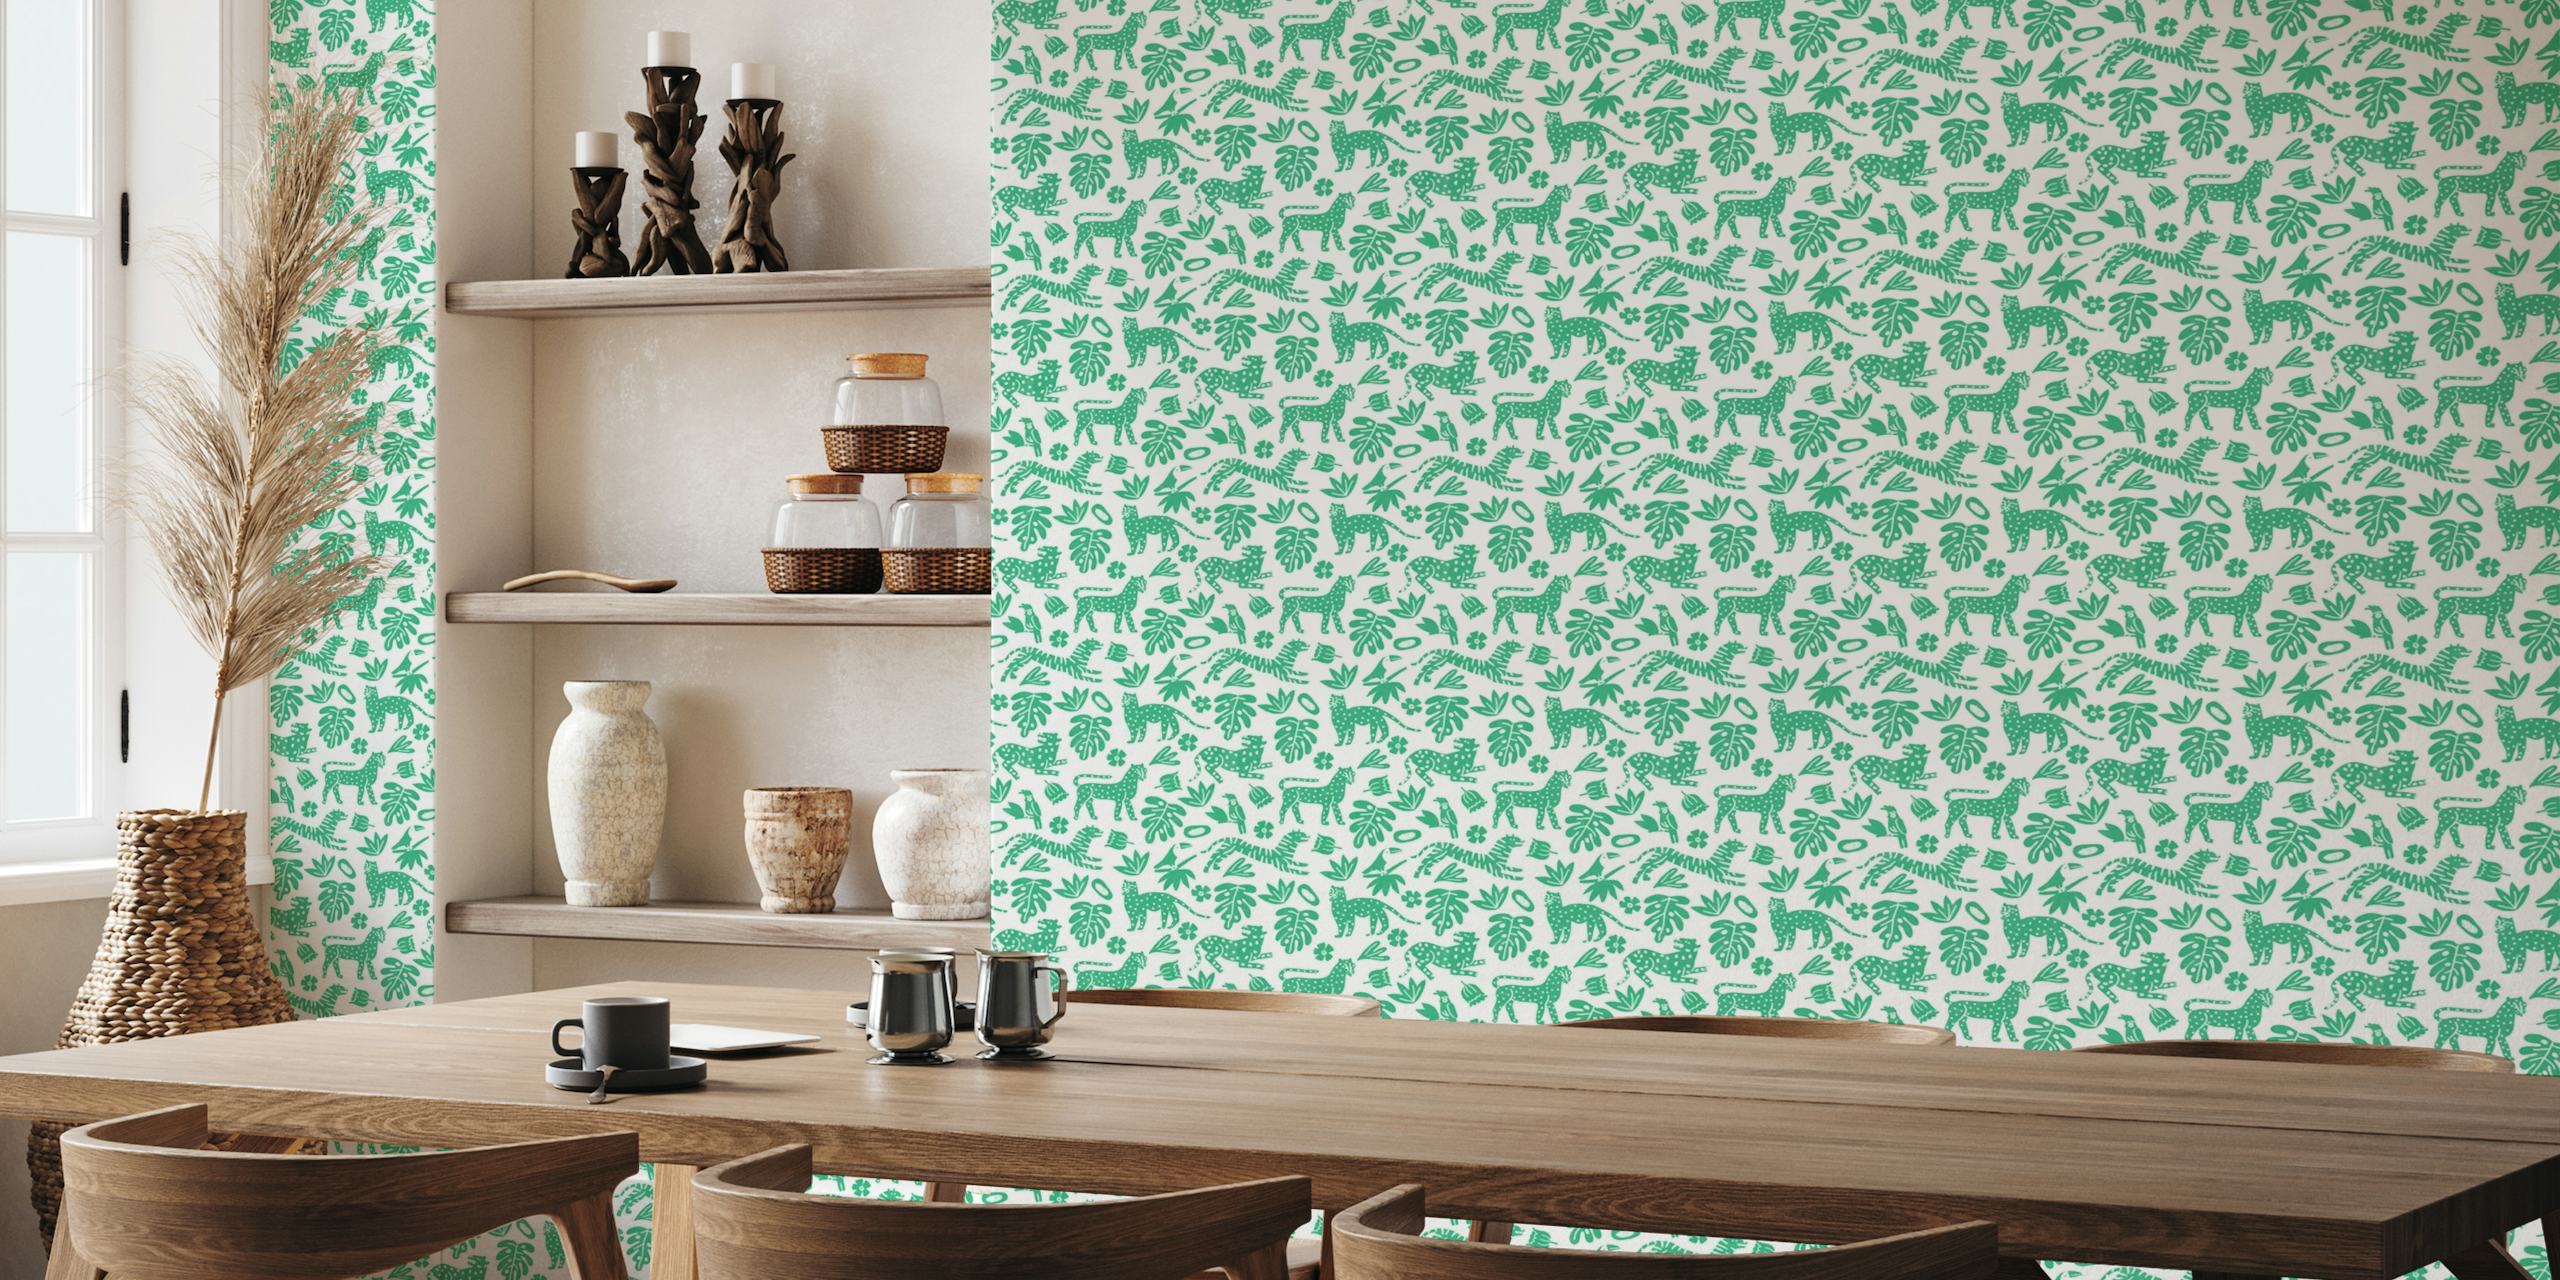 Illustrative wall mural featuring tigers and monstera plants in a vibrant green pattern.